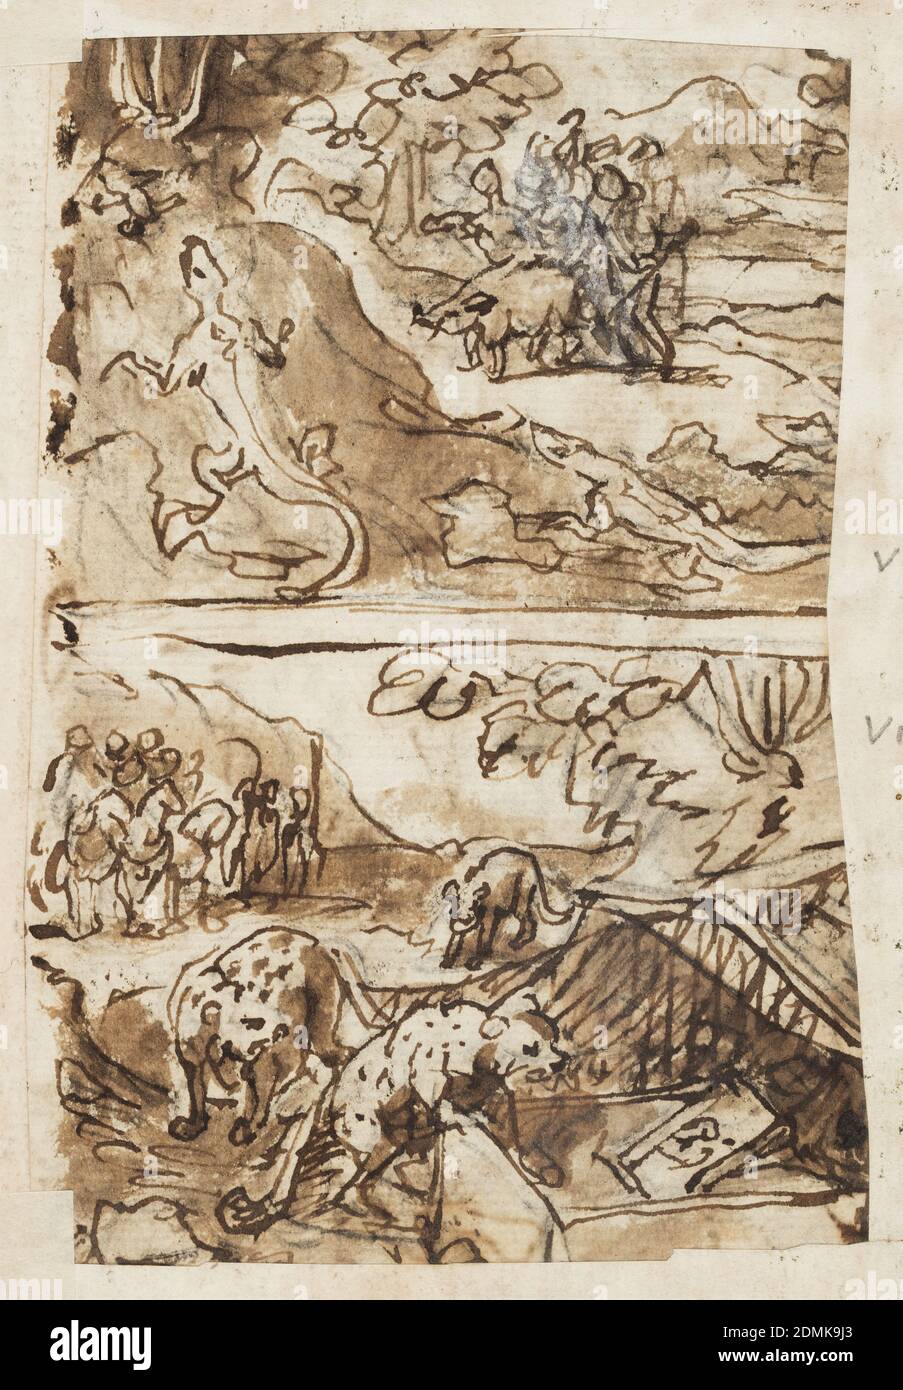 Recto: Hunting Ducks using Pumpkins in the West Indies; Verso, above: Crocodile Hunt in the Nile; Verso, below: Hunting Tigers using Traps and Mirrors, Jan van der Straet, called Stradanus, Flemish, 1523–1605, Pen and ink, brush and brown wash on laid paper, Horizontal rectangle. Obverse: Hunters using headpieces in the shape of ducks to serve as decoys in trapping the birds. Hunters submerged in the water wearing the headgear. Left, two hunters putting on the headpieces (gourd). Reverse: top - in the background, a pig used as a decoy in trapping alligators. Two alligators in the foreground Stock Photo